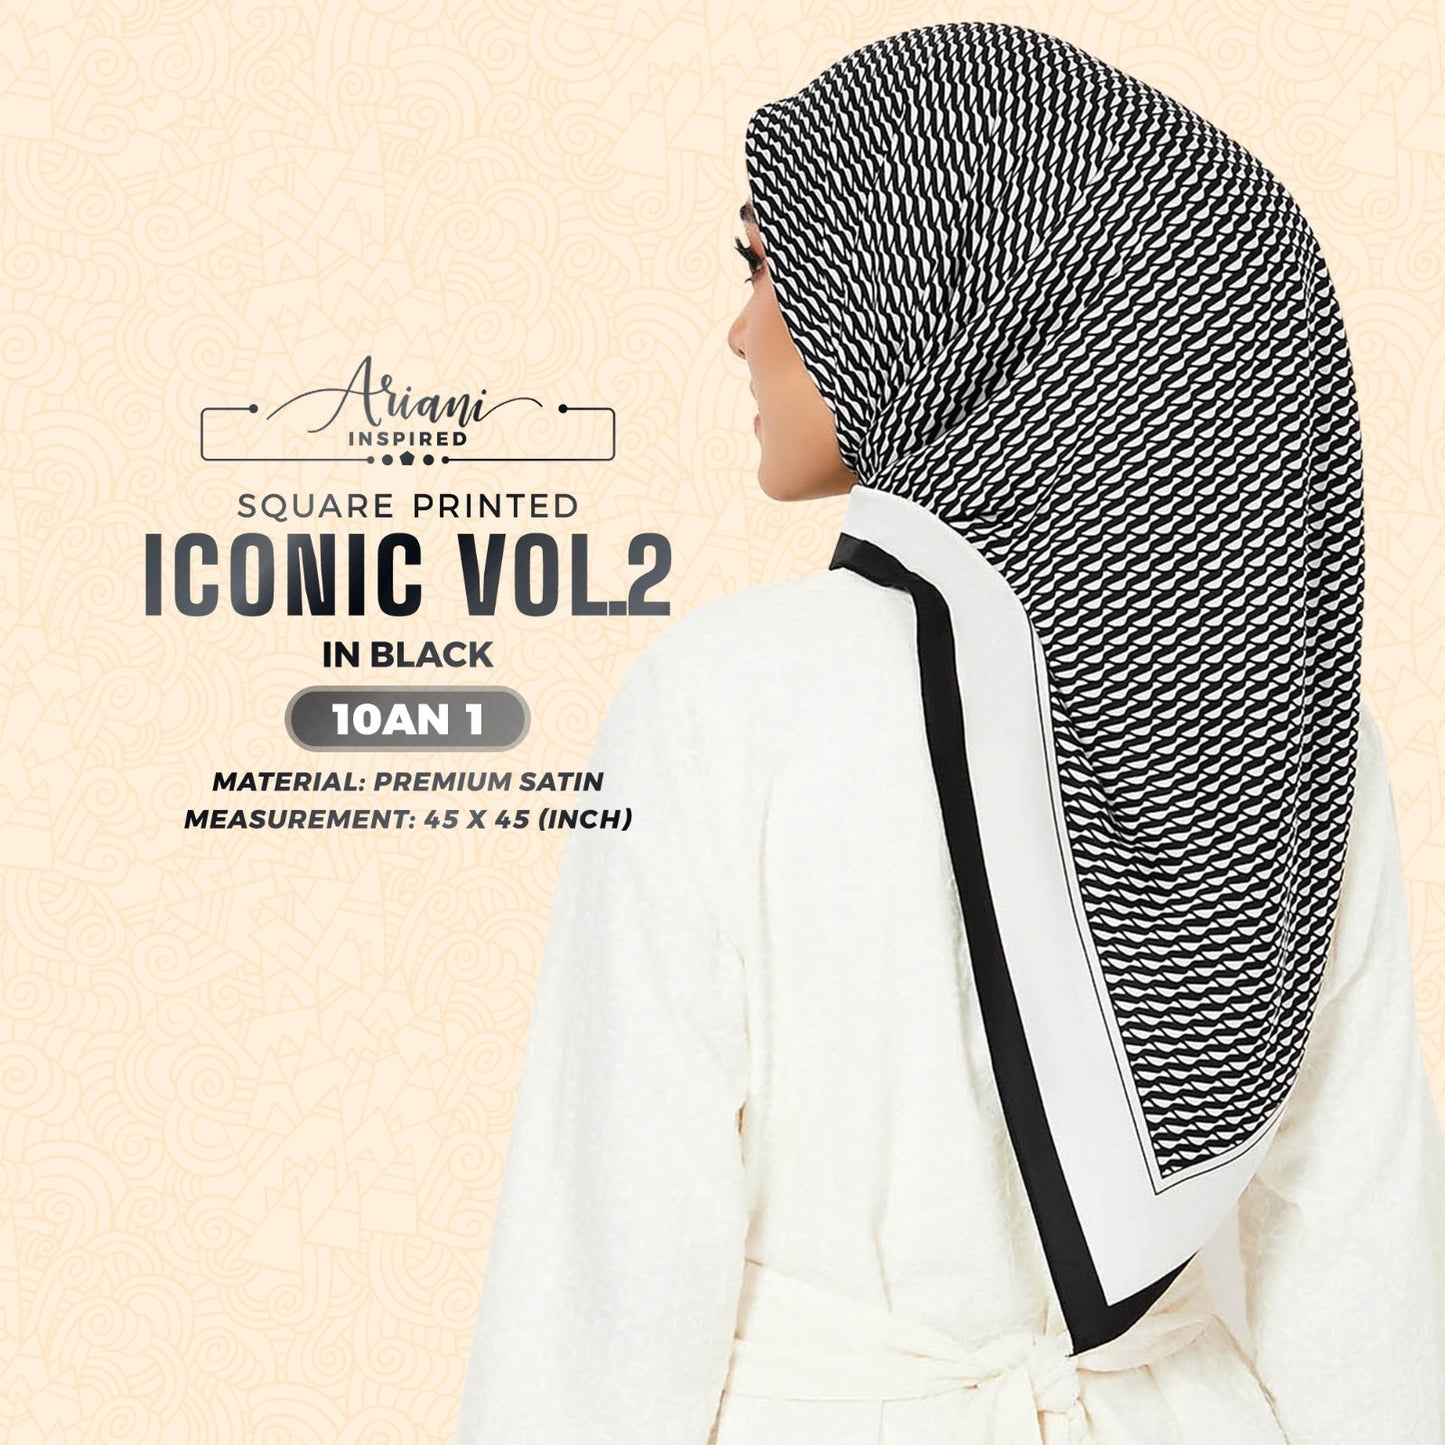 Ariani Inspired Iconic VOL.2 Printed SQ Collection